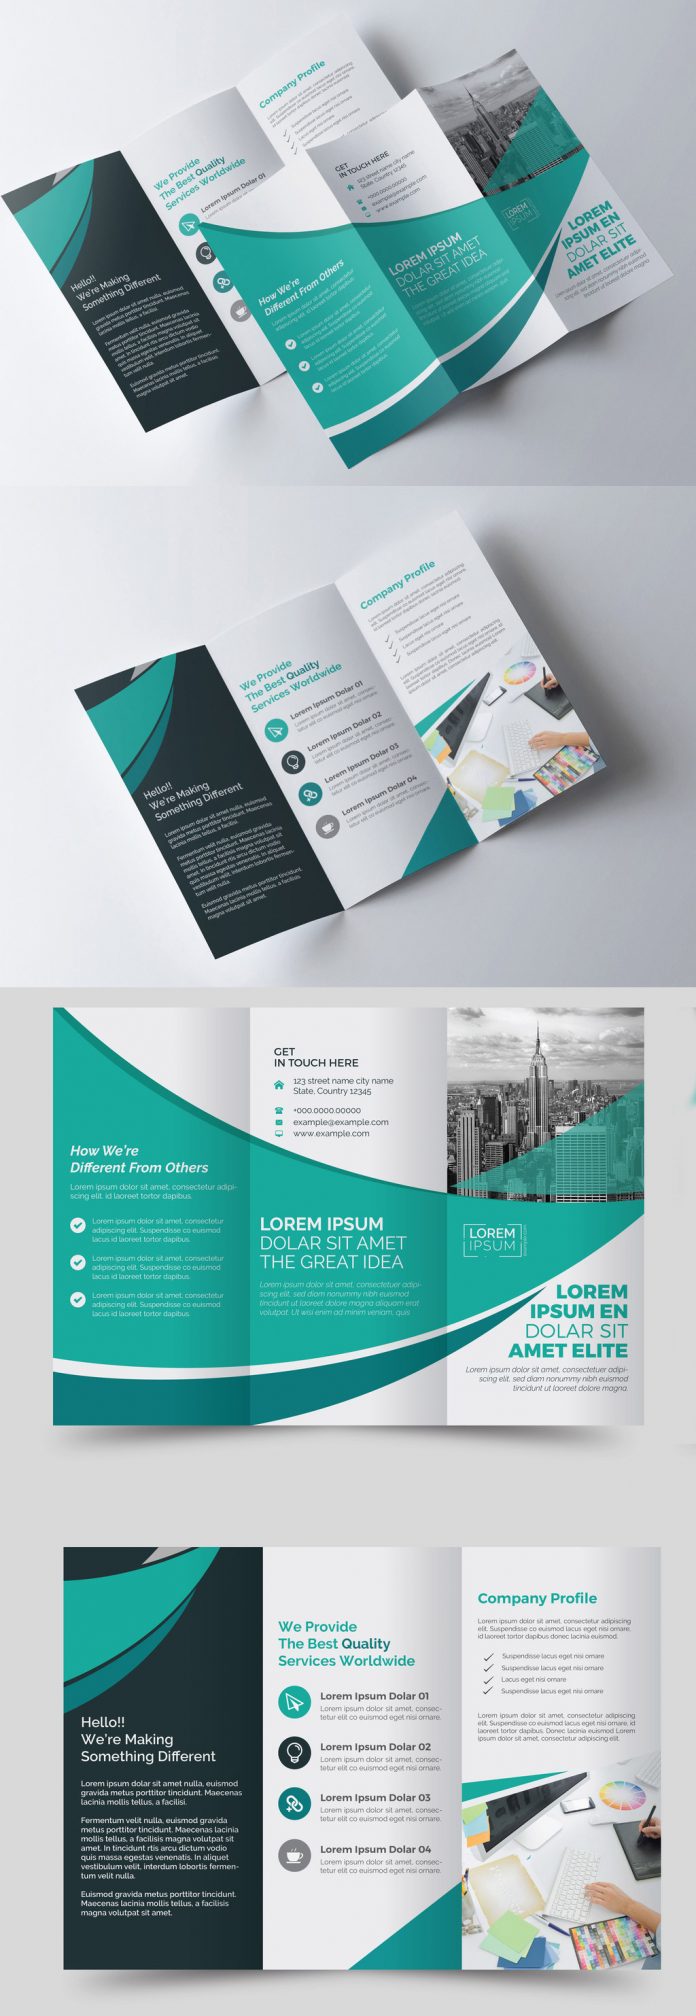 Trifold Brochure Template with Blue and Green Accents For Adobe Illustrator Tri Fold Brochure Template